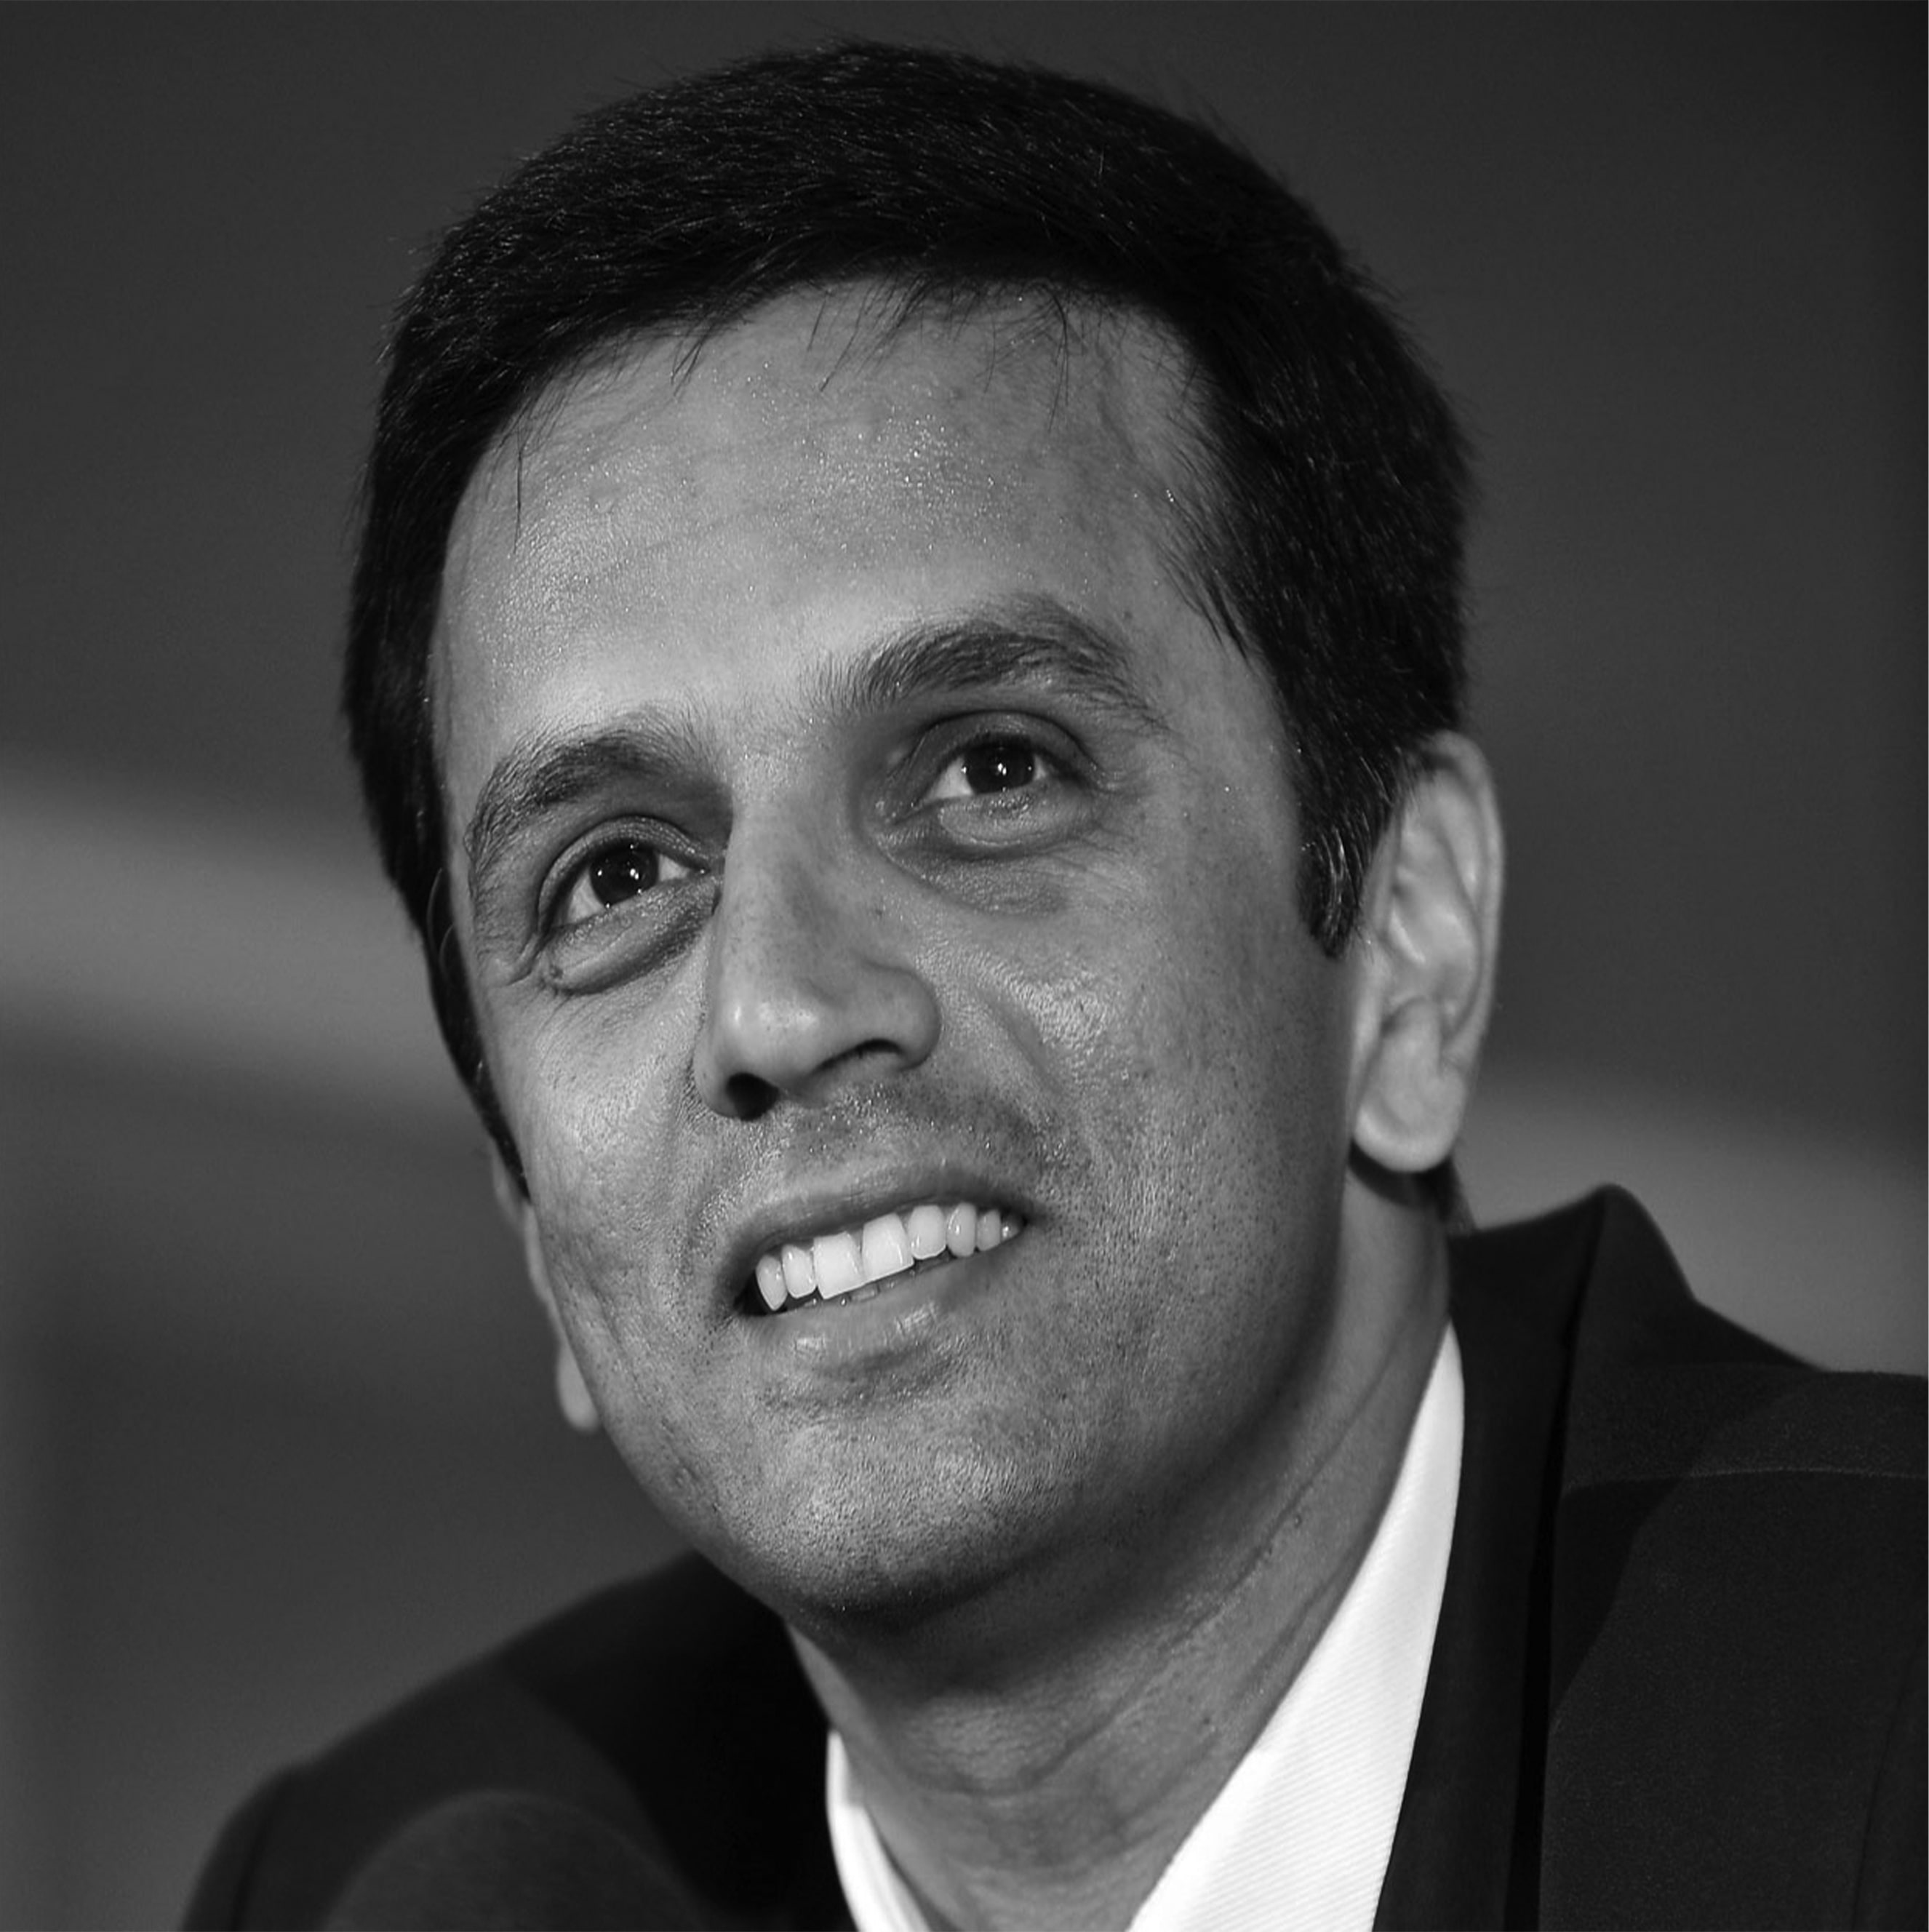 Test matches are cricket's 'life source' - Rahul Dravid | ESPNcricinfo